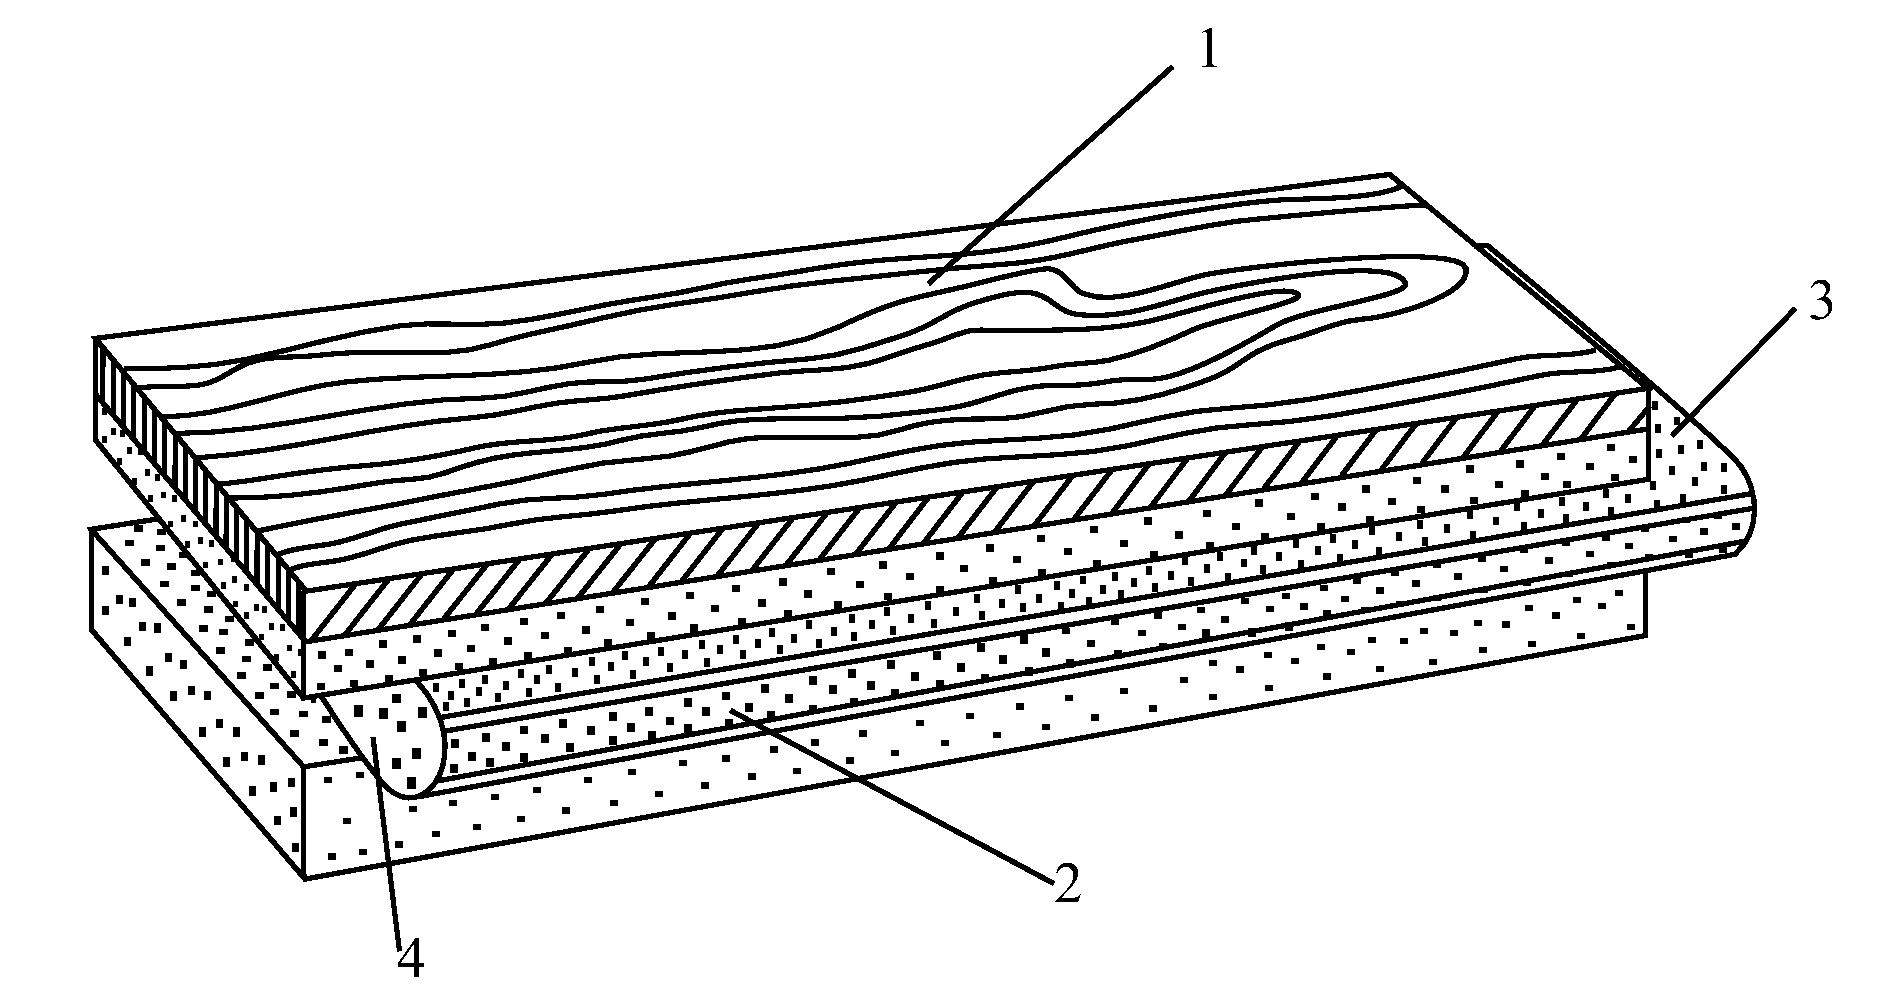 Compound Flooring and Manufacturing Method Thereof